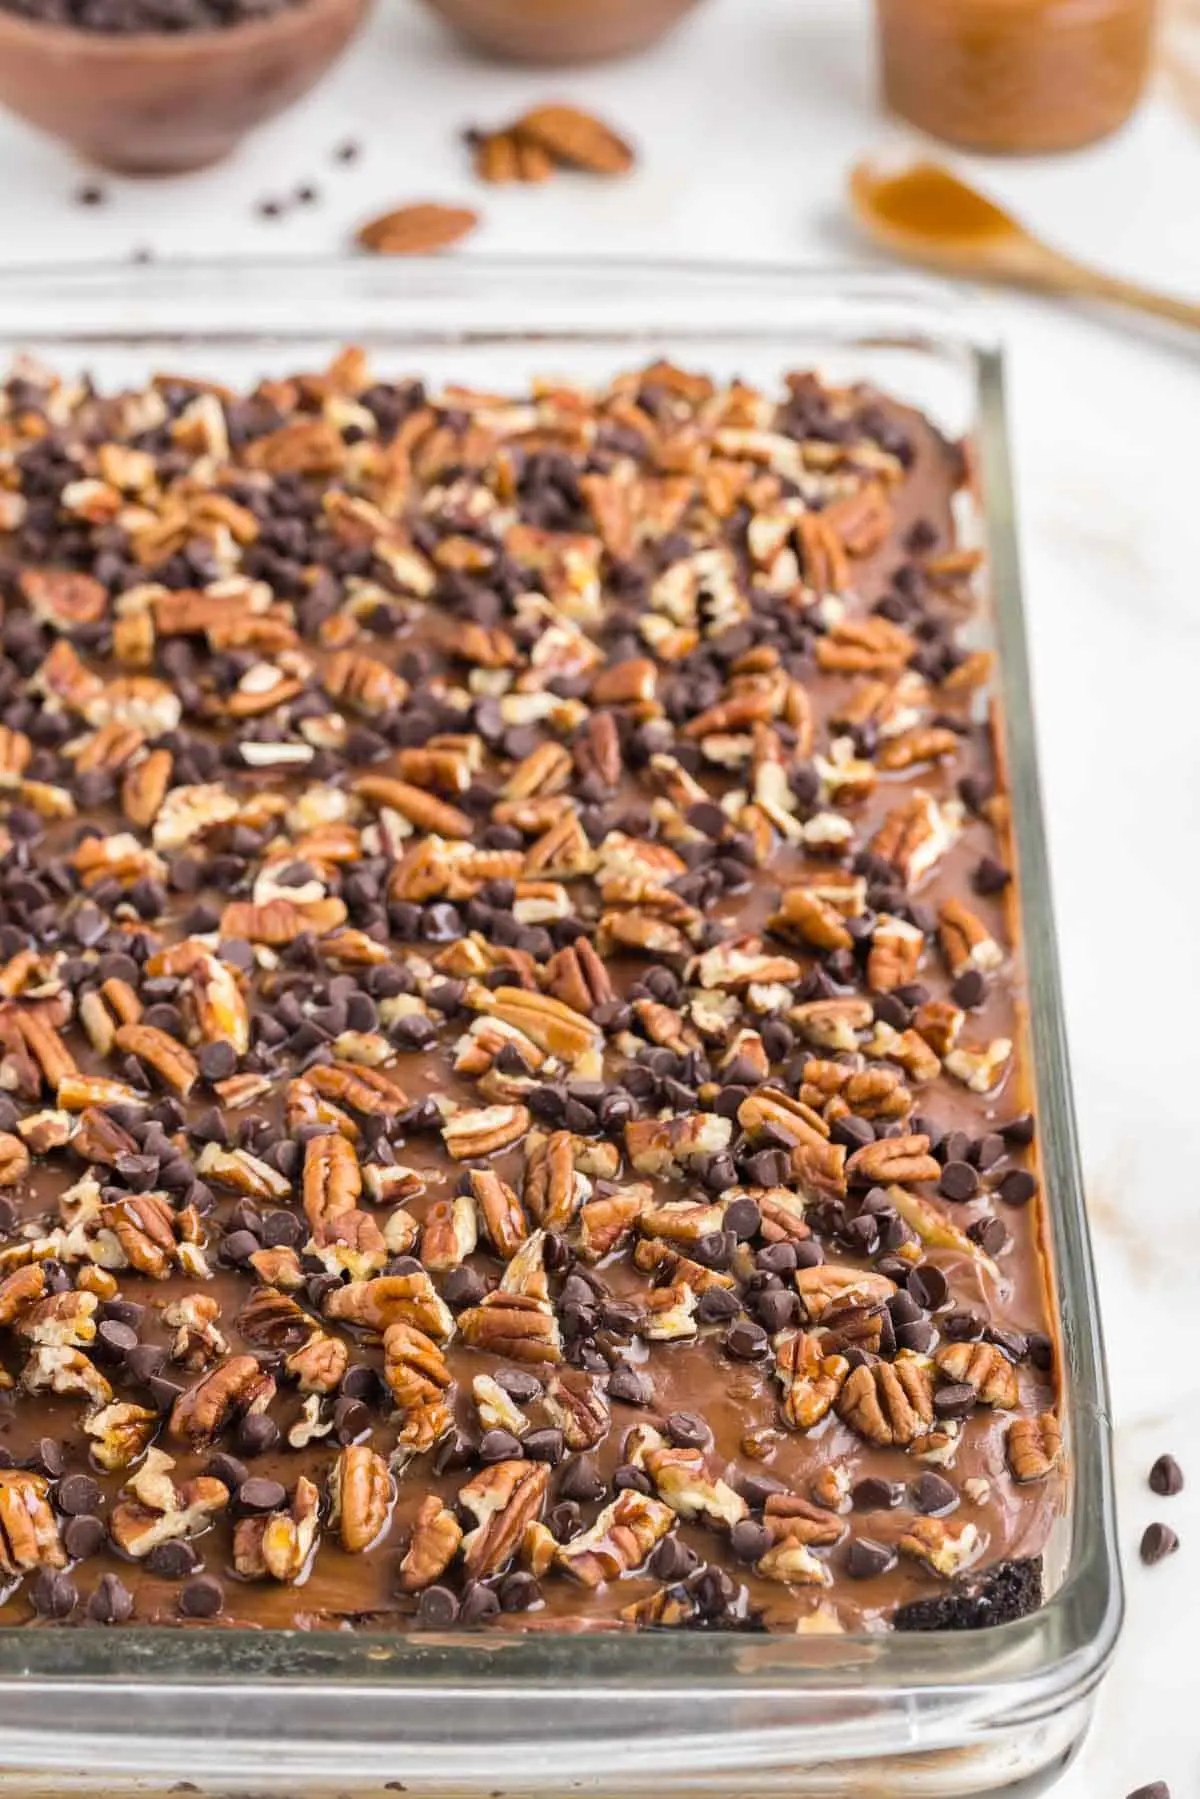 Turtle Poke Cake is a decadent chocolate cake filled with a caramel and condensed milk mixture and topped with chocolate frosting, chopped pecans and mini chocolate chips.